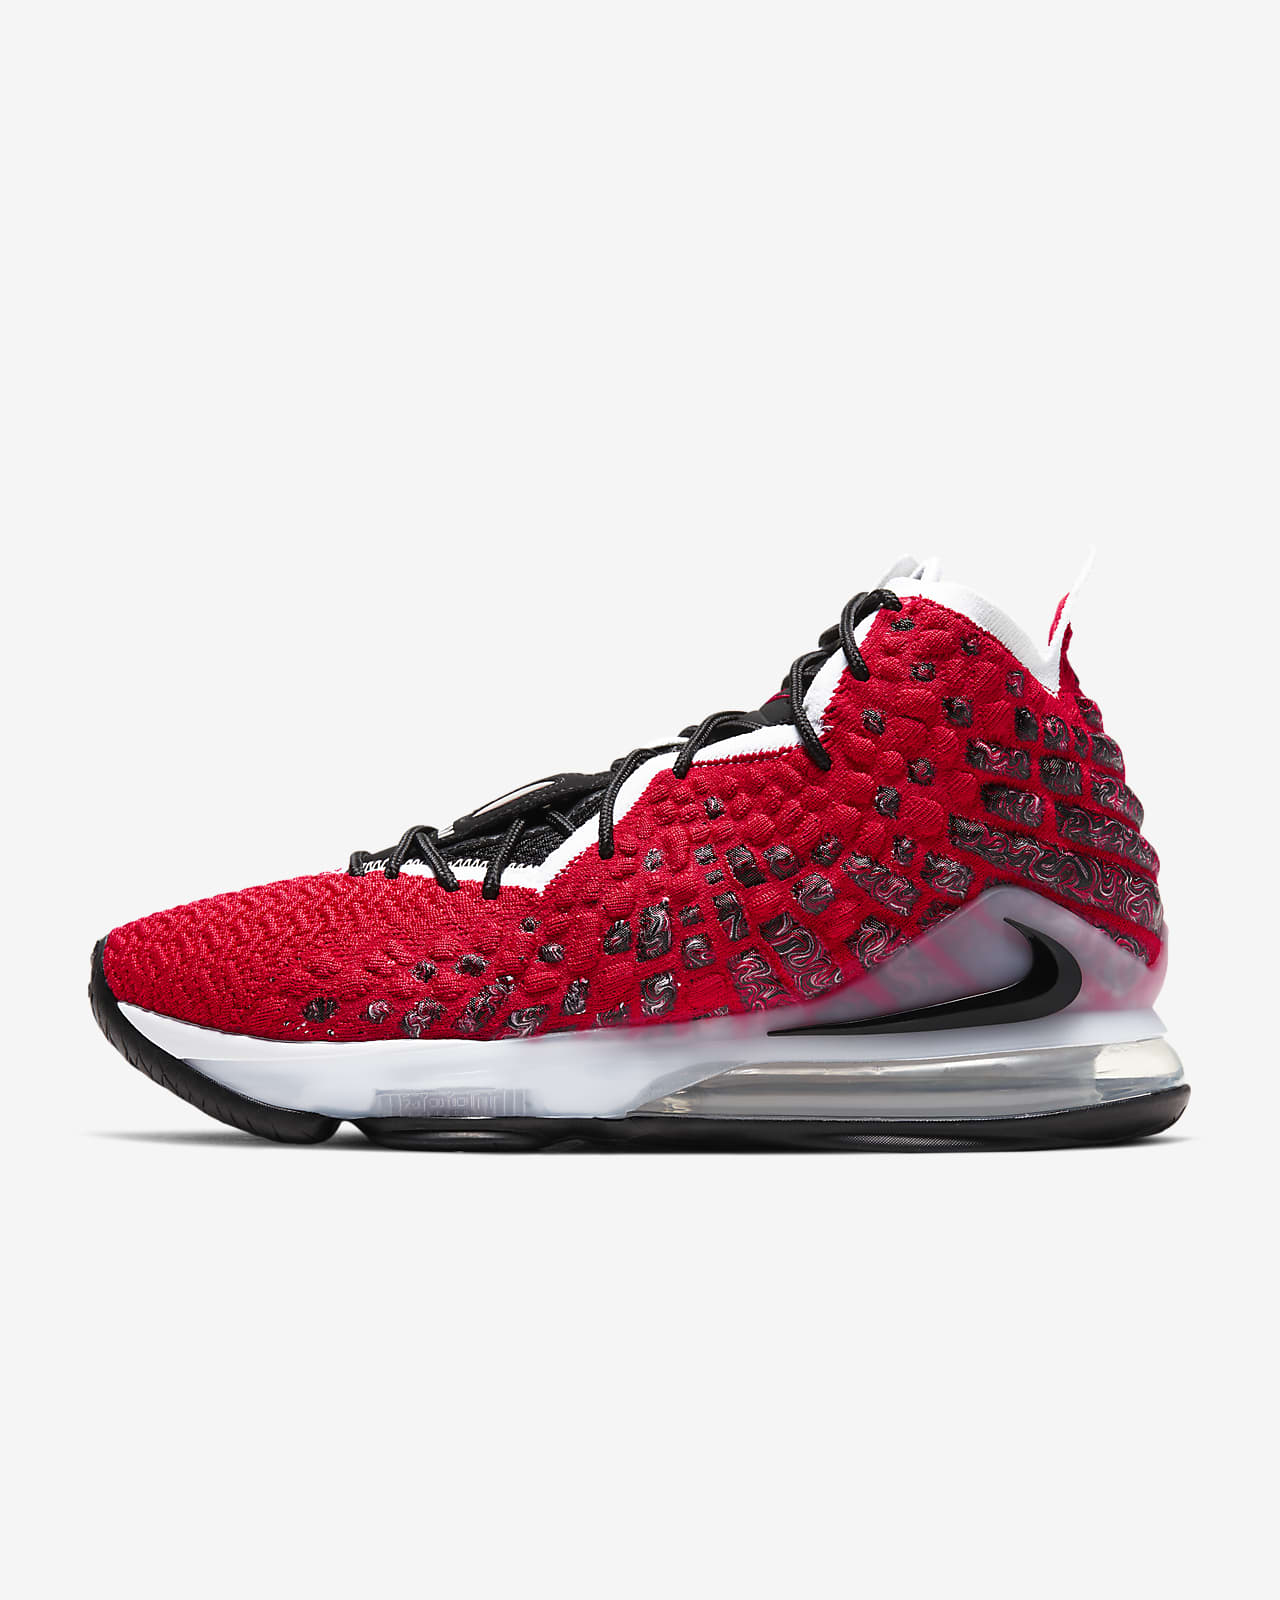 red and grey basketball shoes